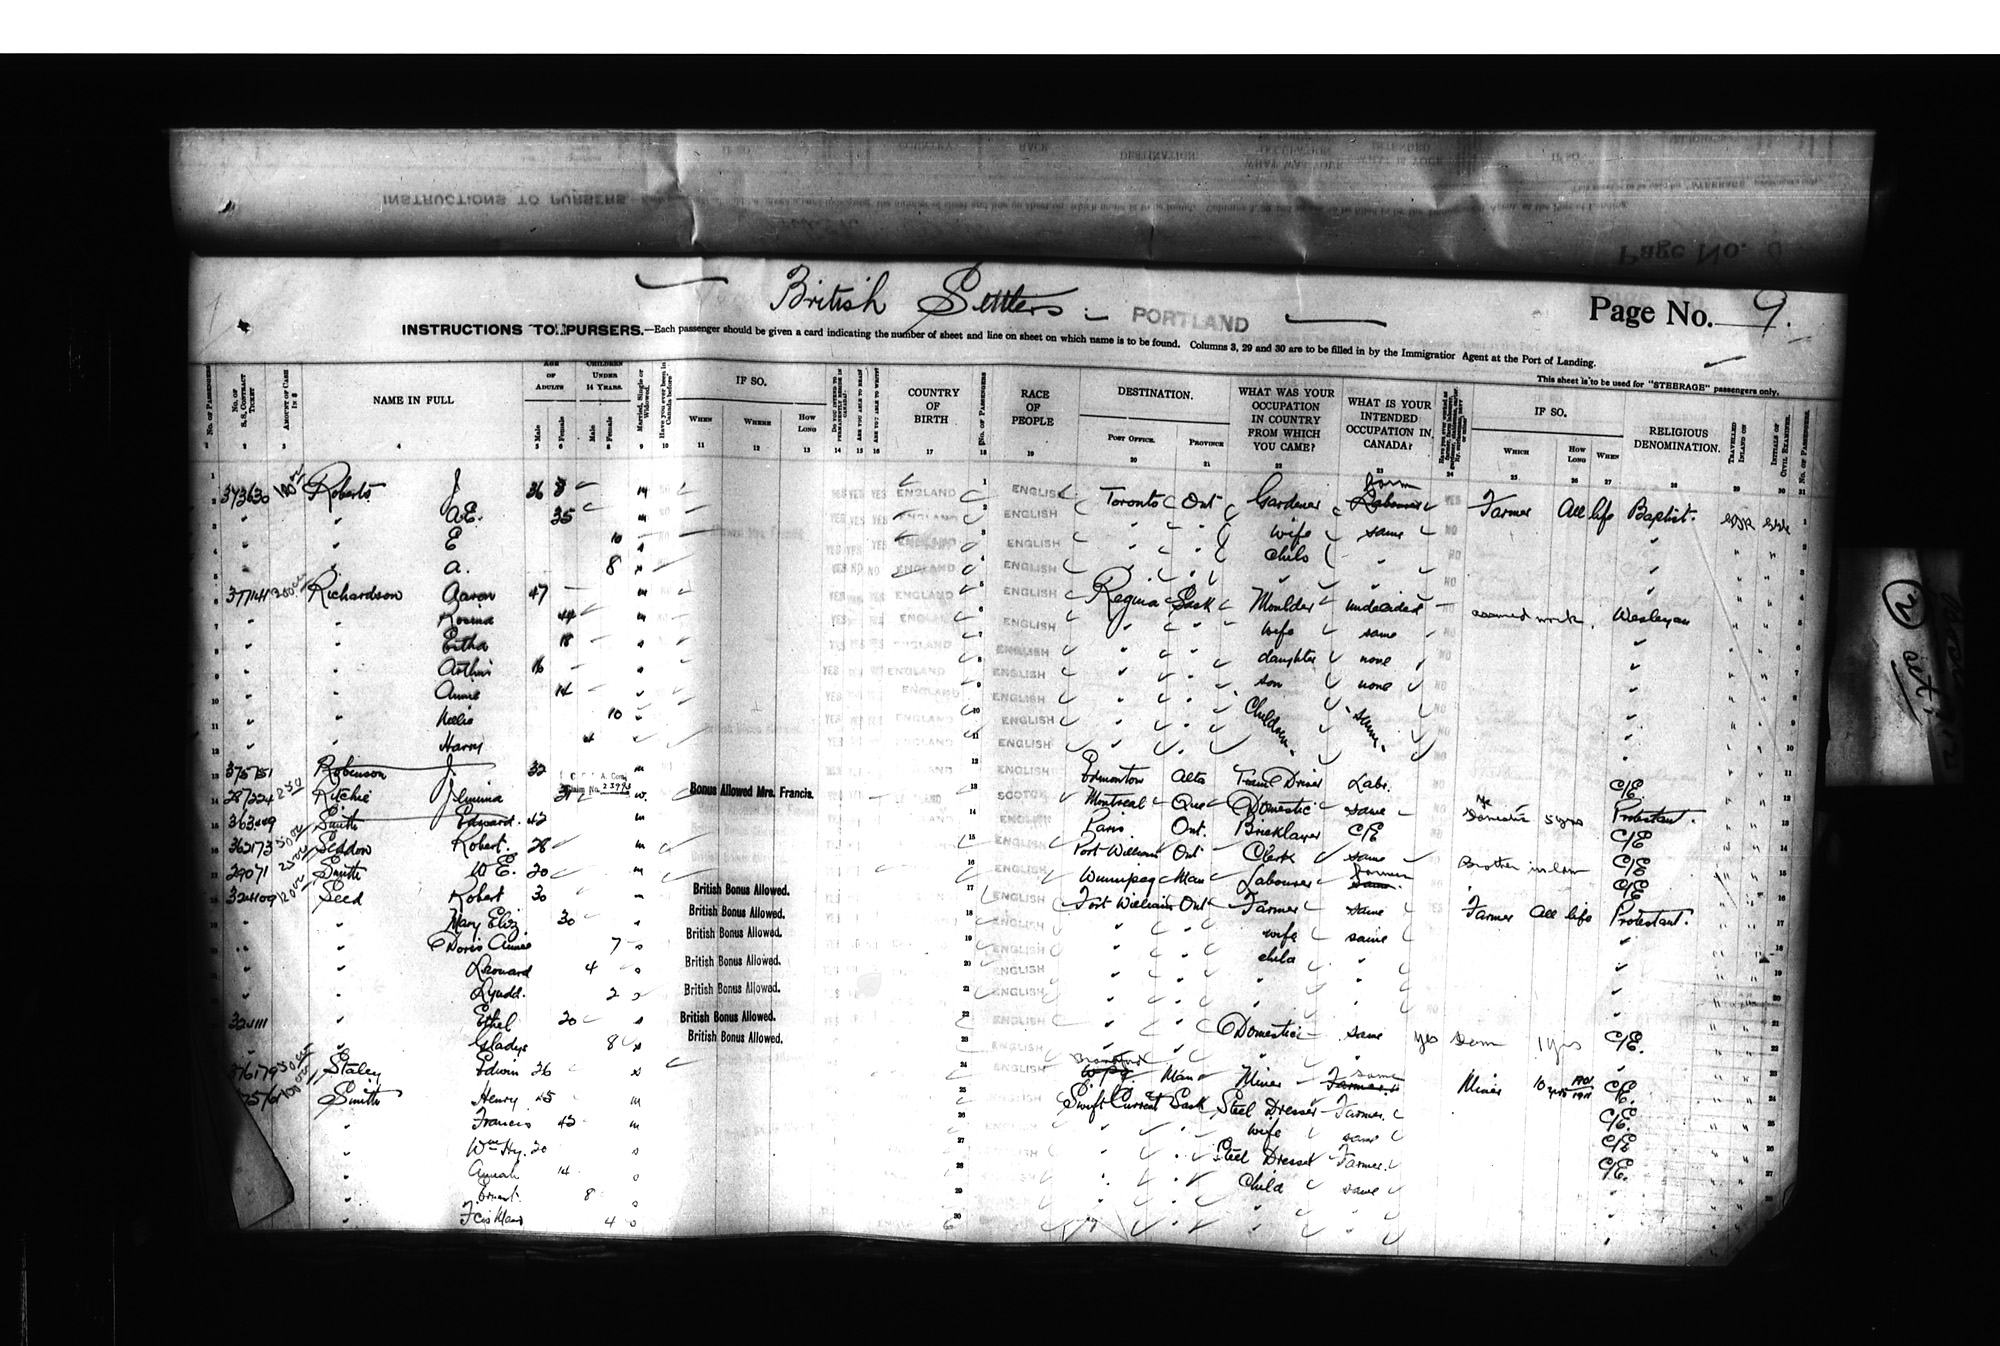 Digitized page of Passenger Lists for Image No.: CANIMM1913PLIST_0000406960-00182